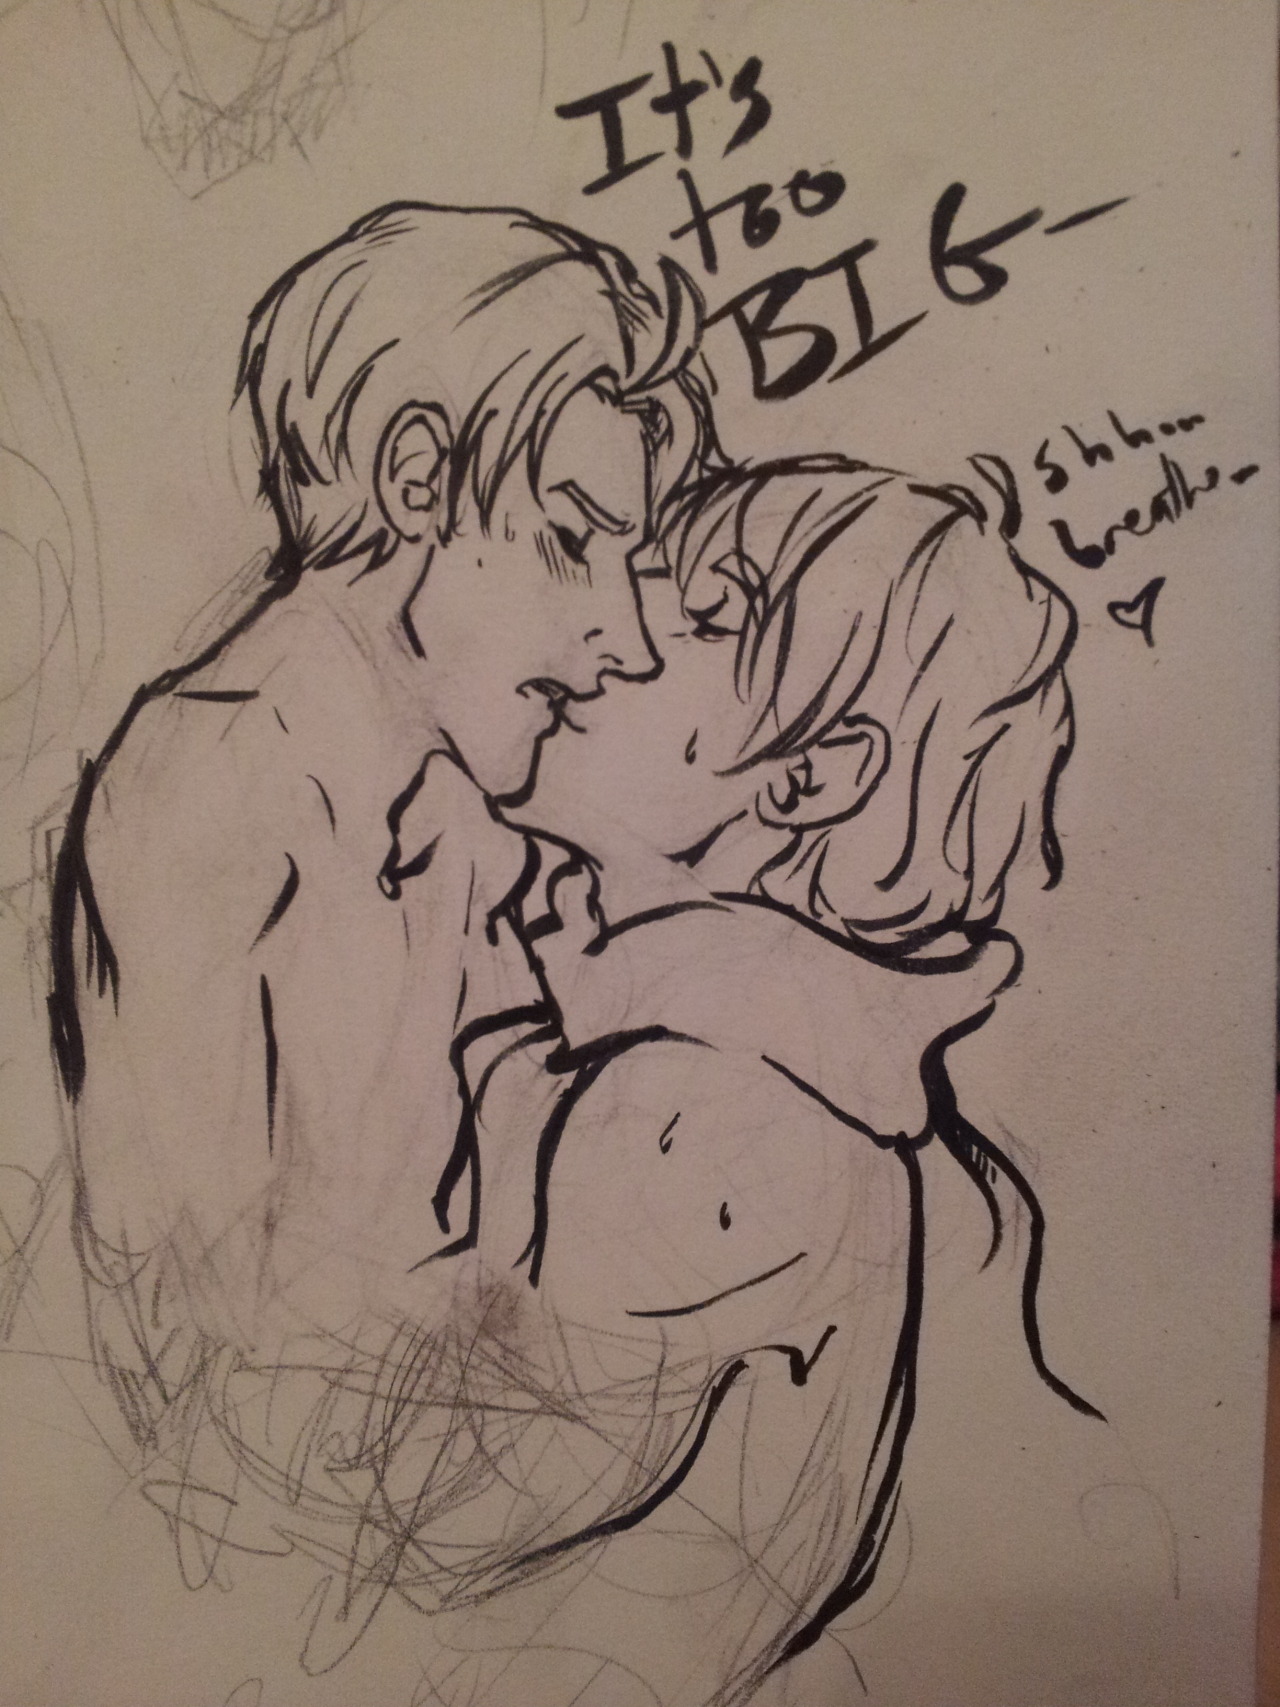 And now before I pass out, another doodle. But this time with late 1700s slow!sex